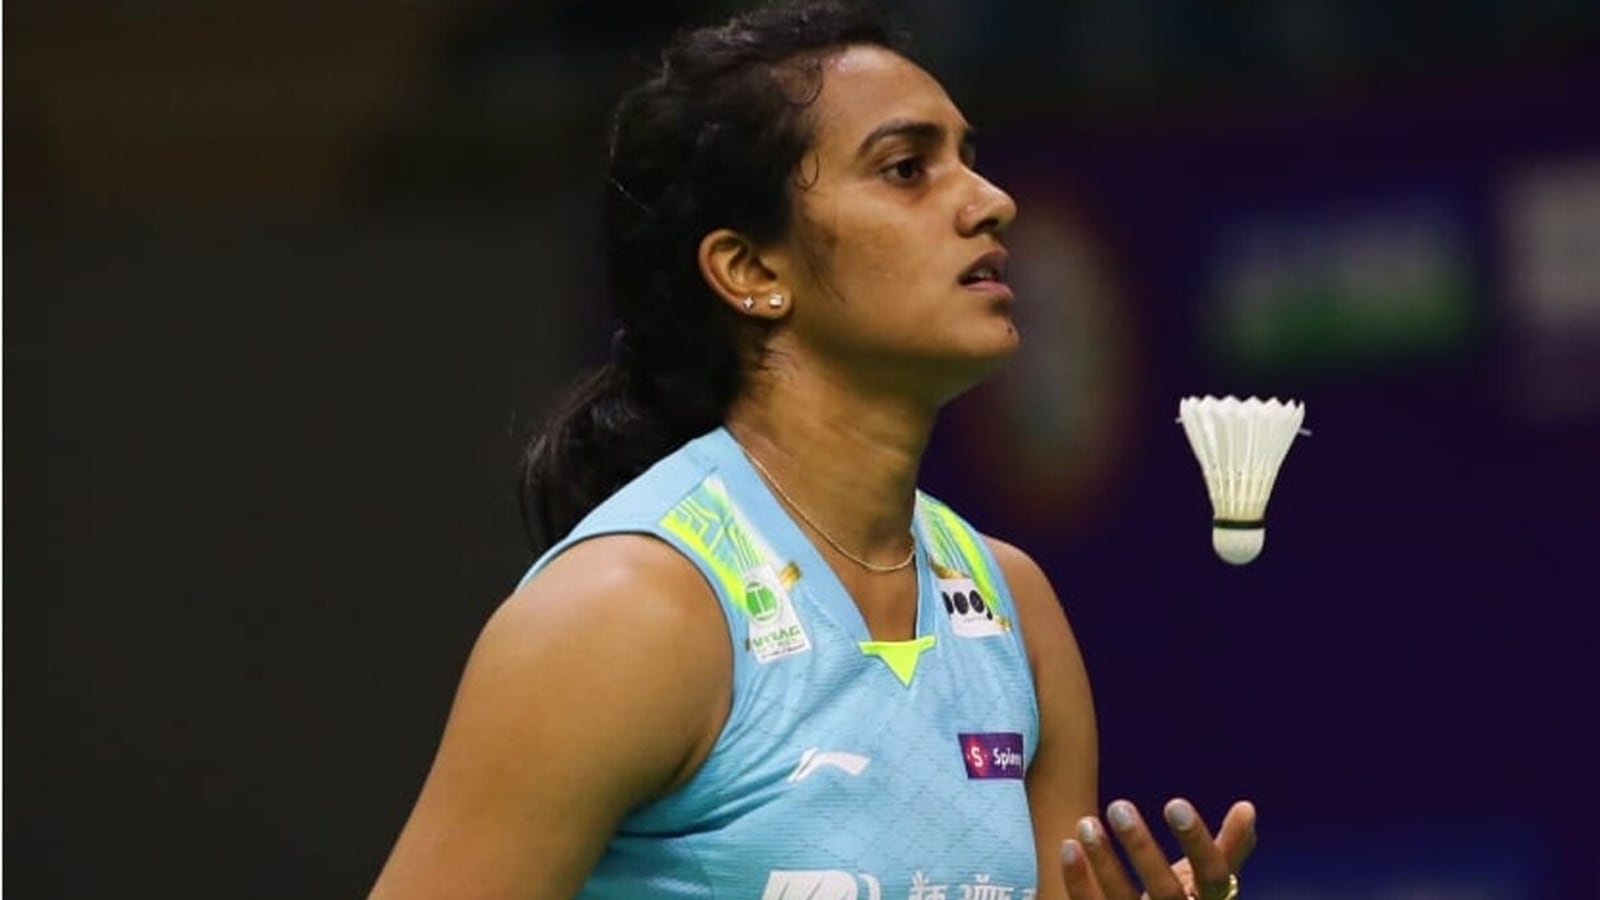 PV Sindhu bows out of India Open at semi-final stage - Hindustan Times